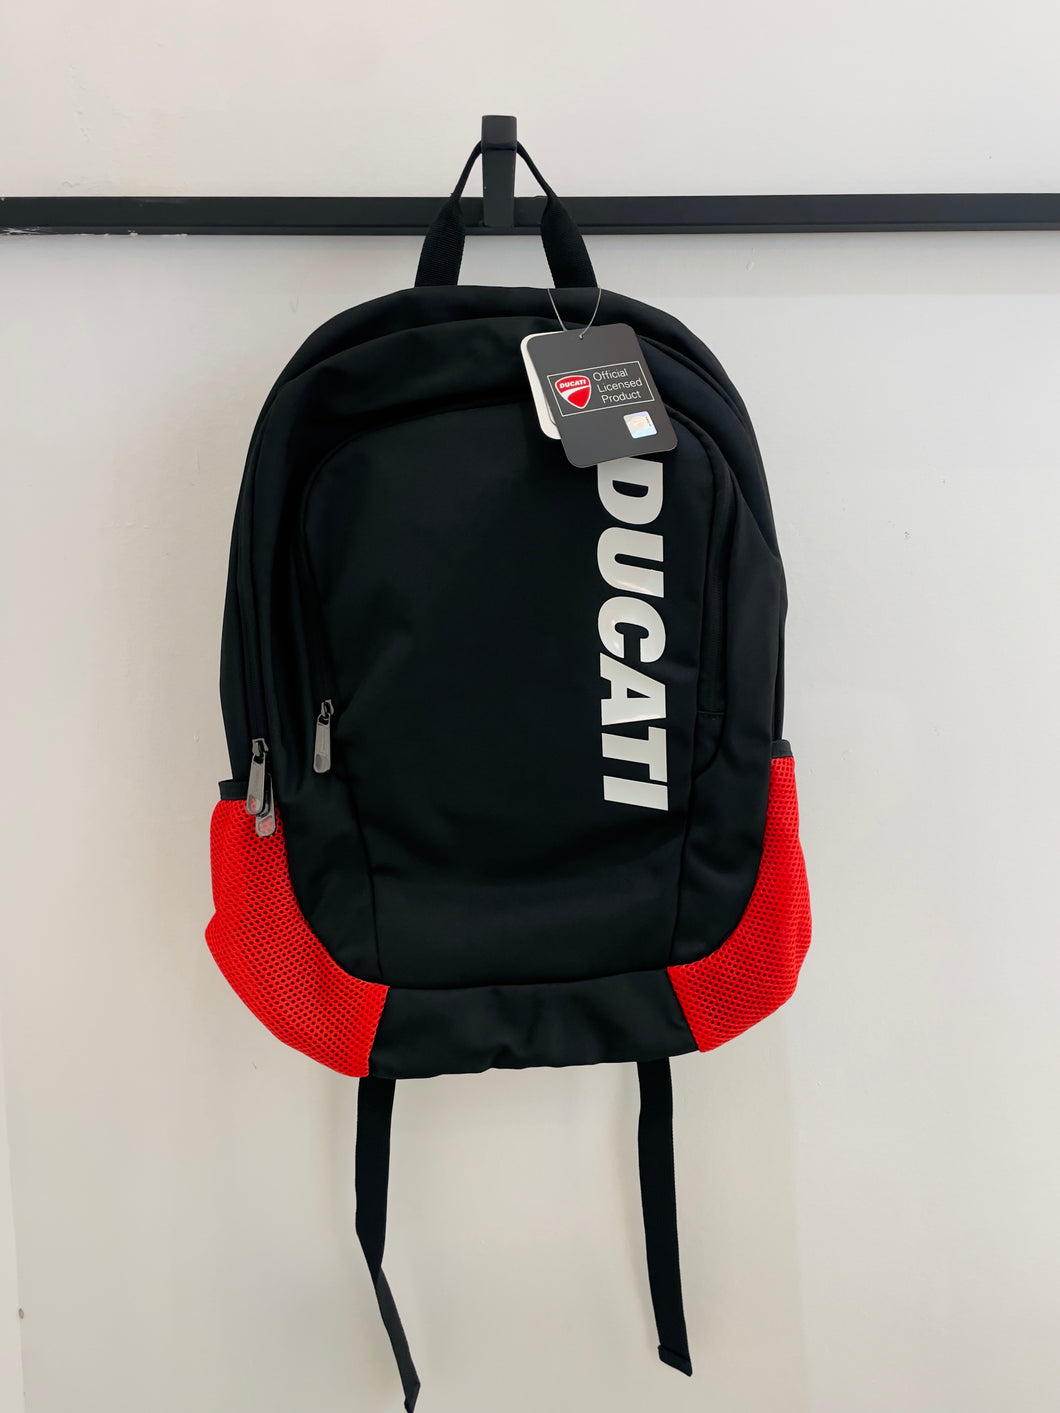 Ducati Logo Backpack with Red Side Bag